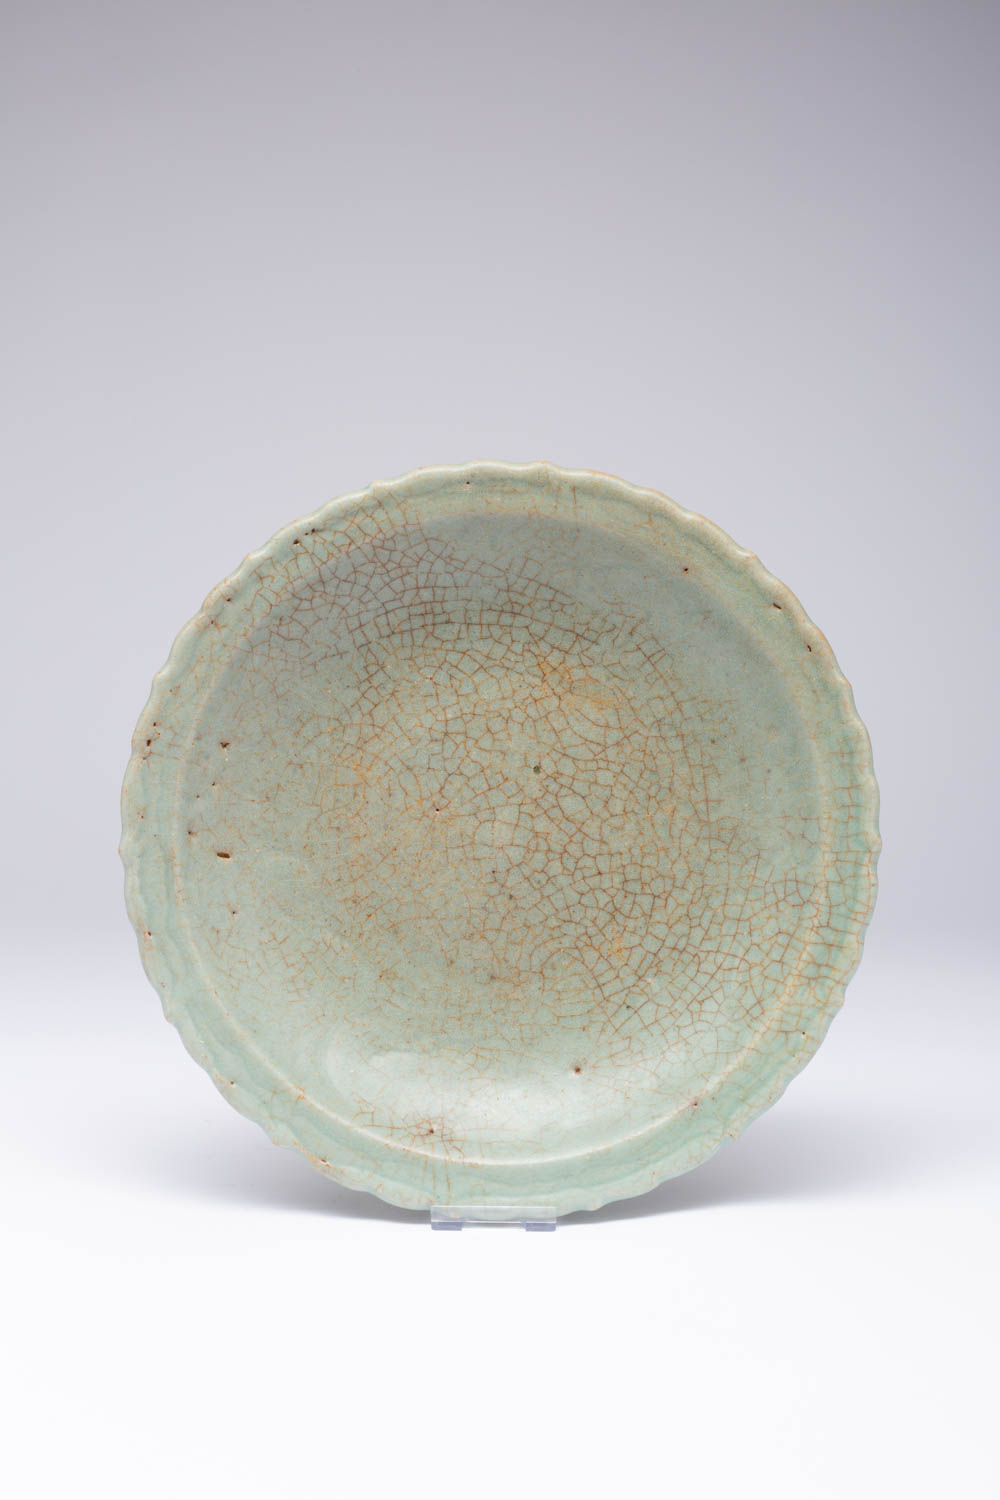 A CHINESE CELADON DISH BARBED-RIM CHARGER 16TH/17TH CENTURY The shallow flaring sides rising from